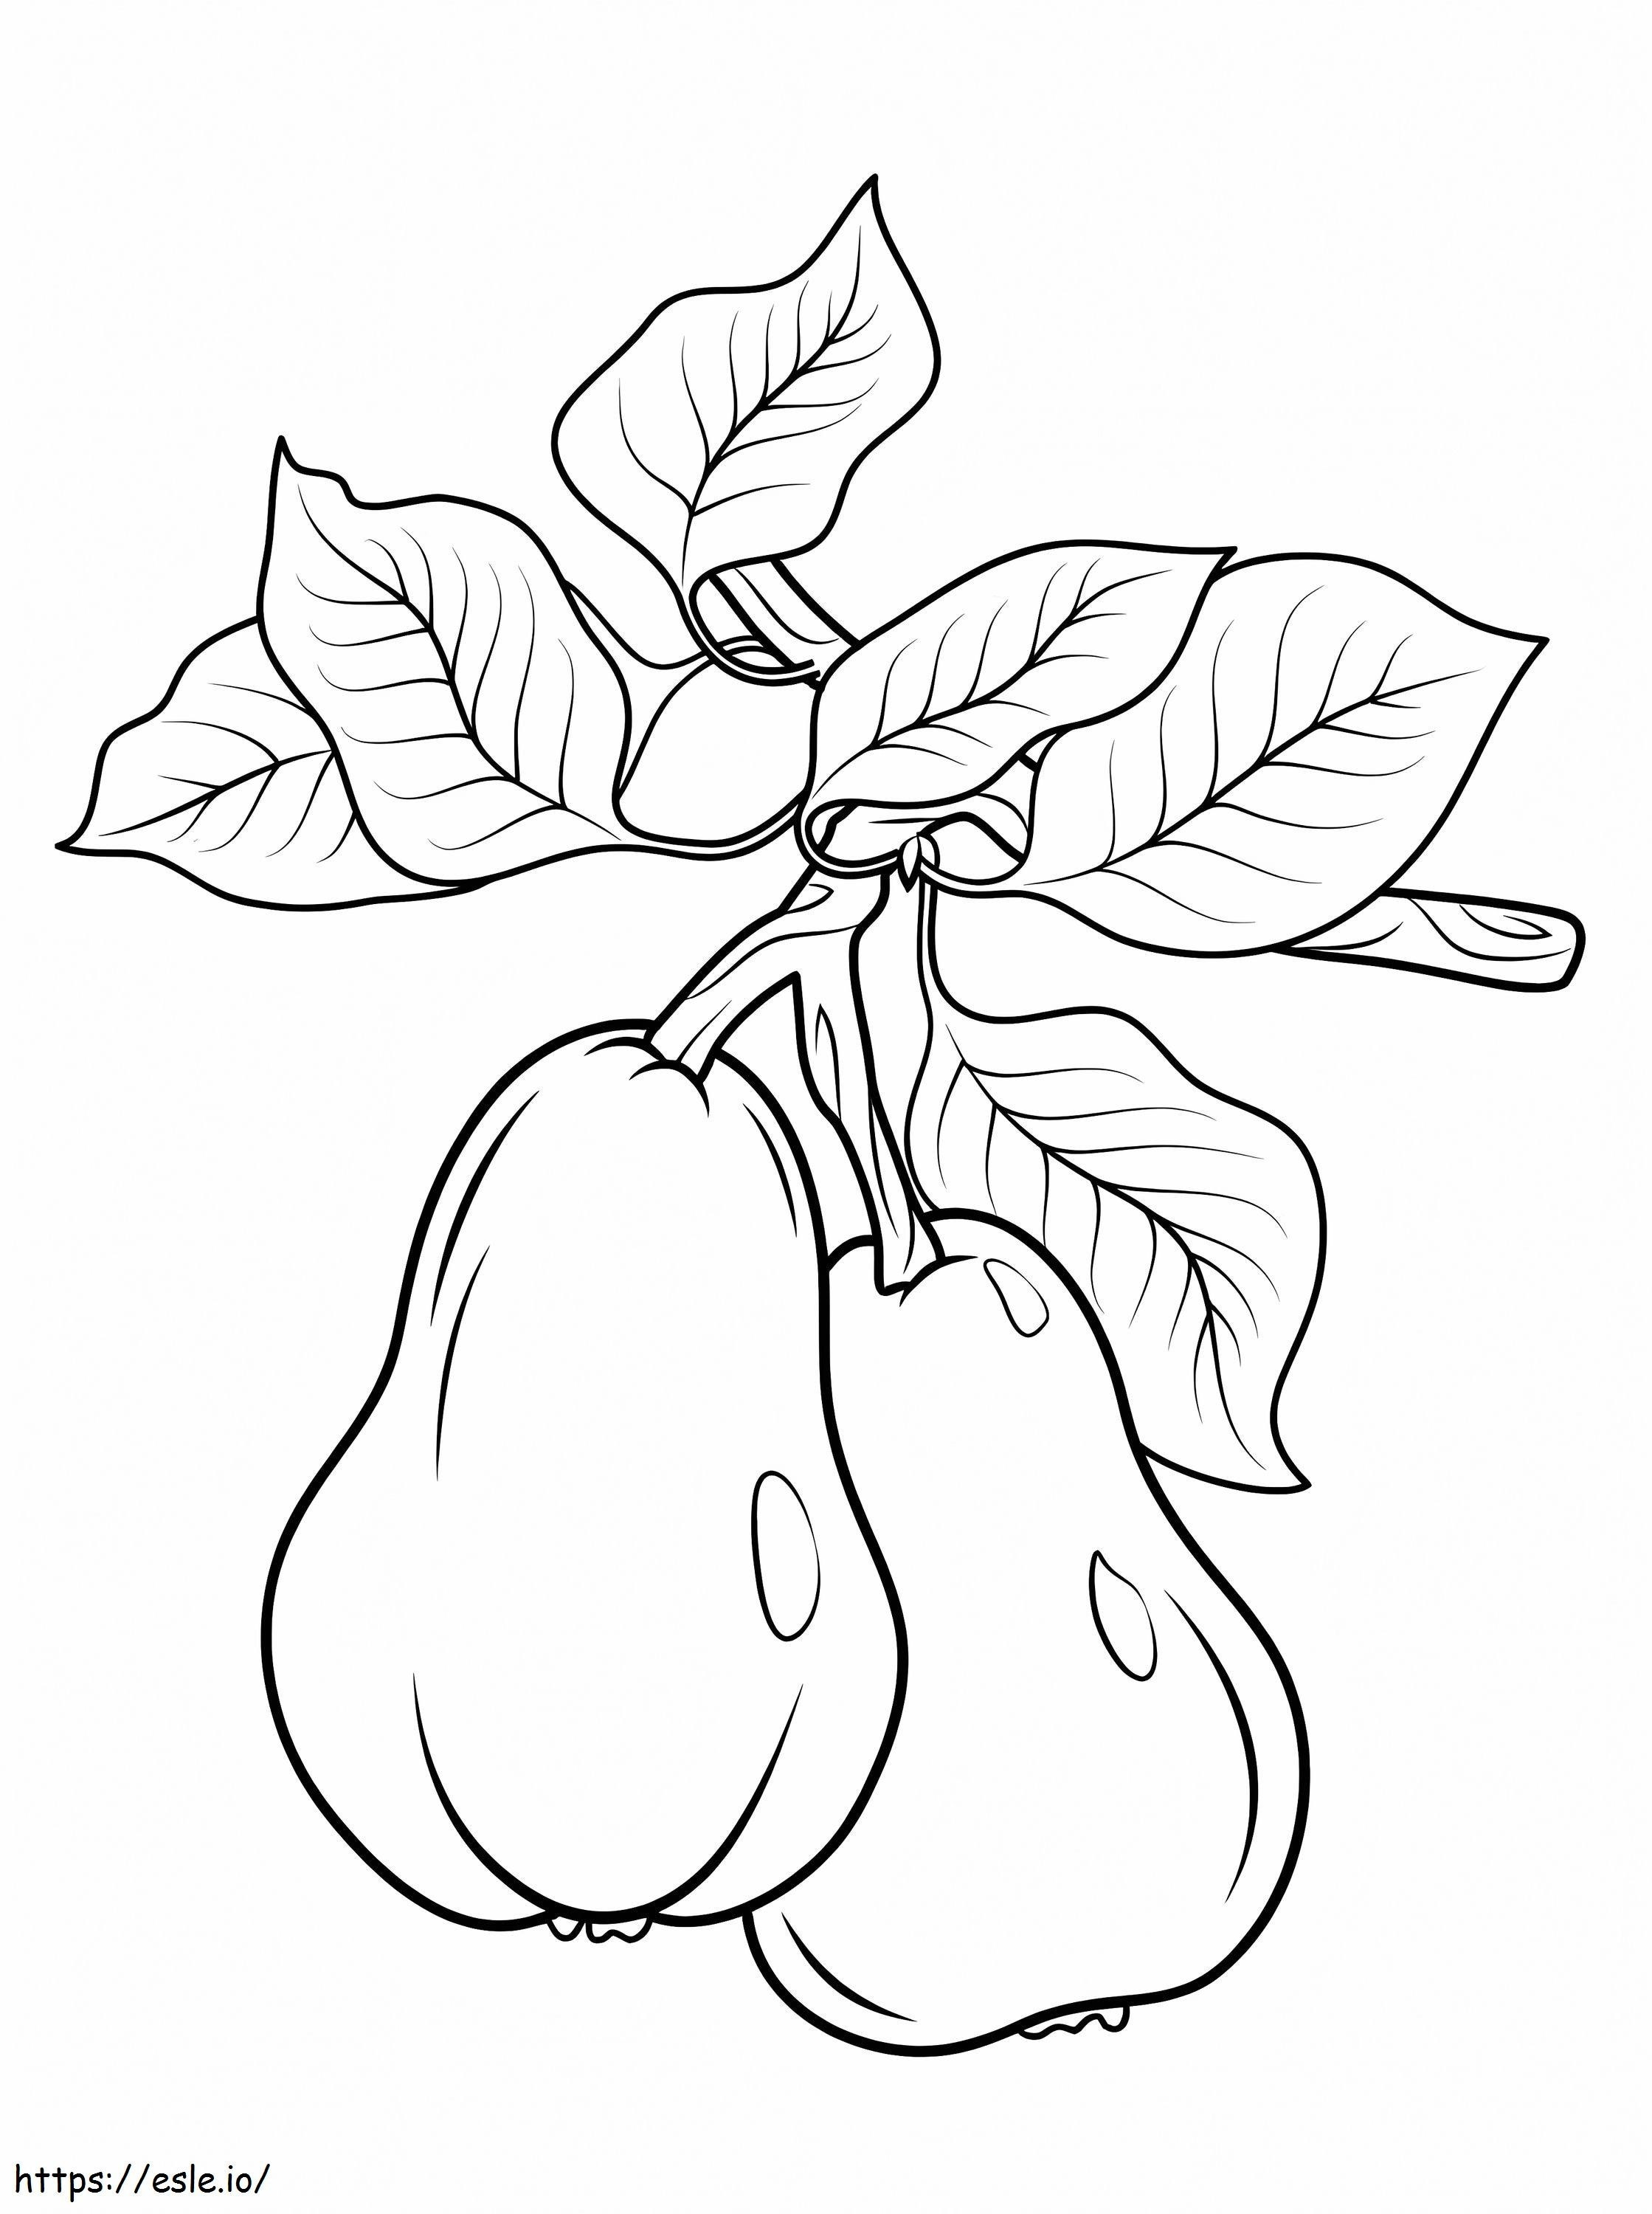 Pears On A Branch coloring page